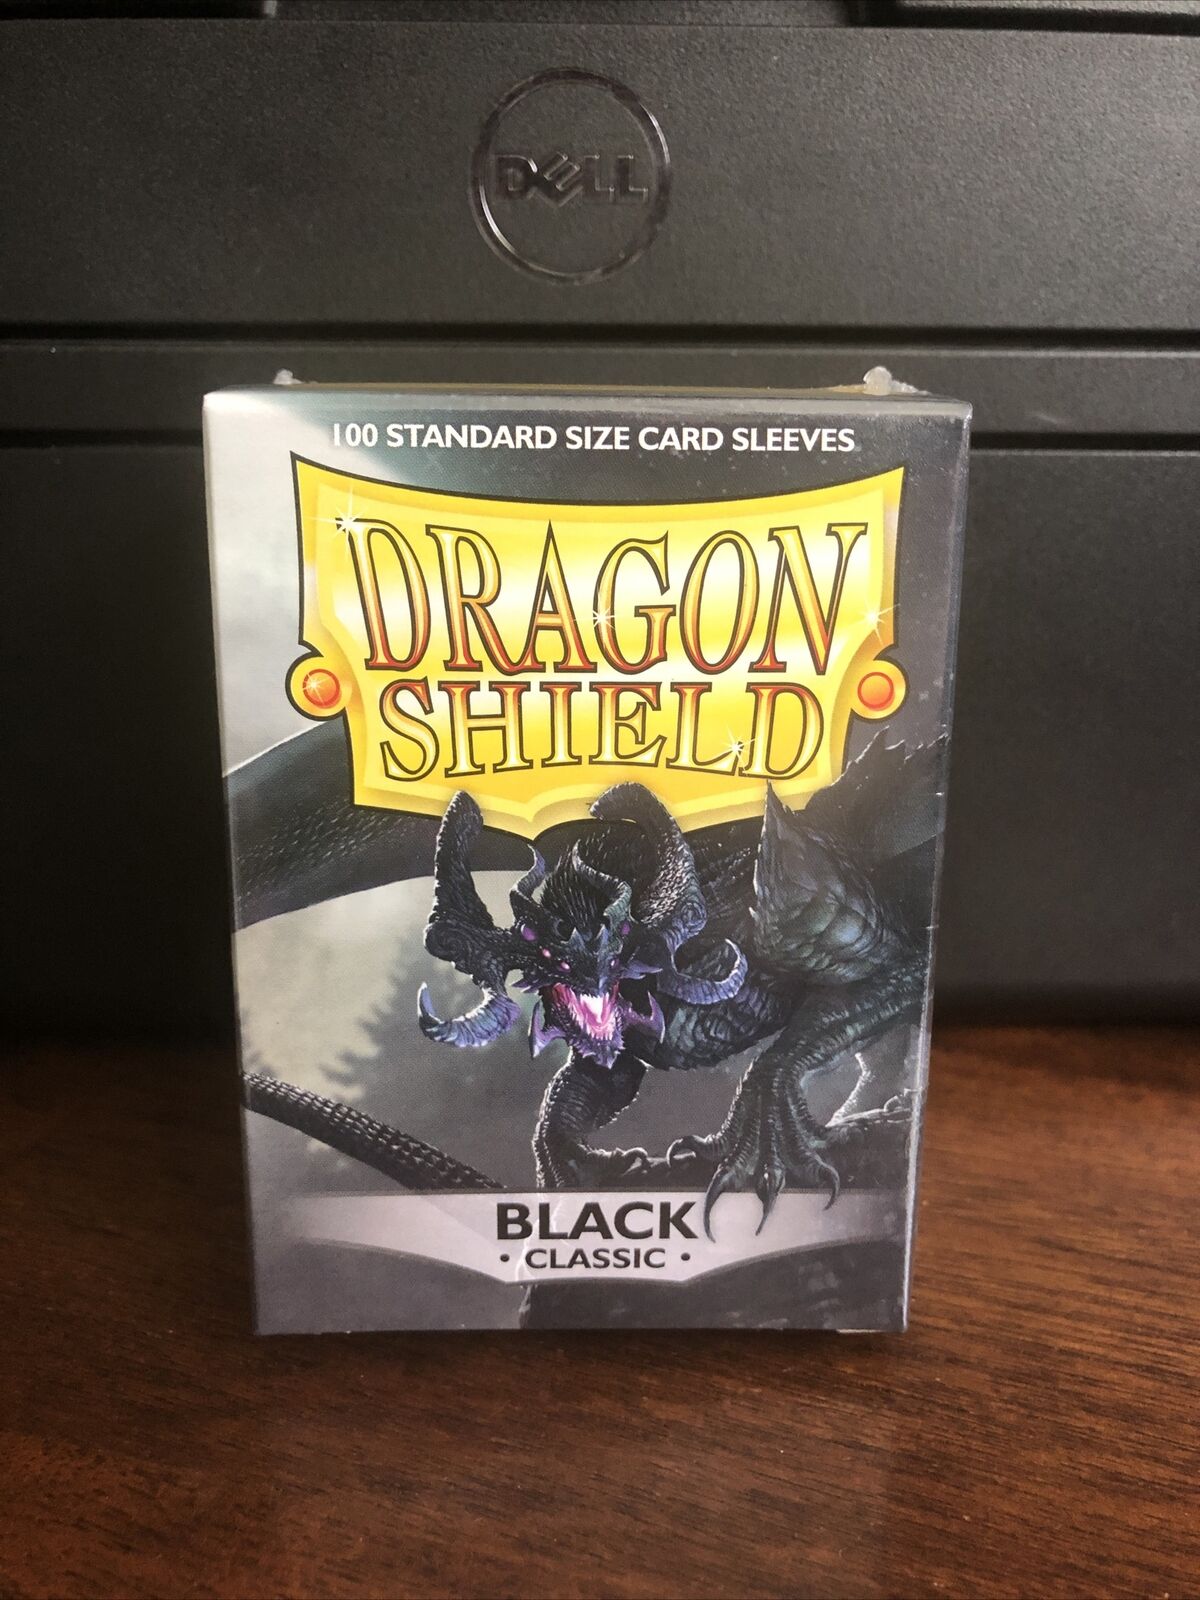 Dragon Shield Sleeves Pack of 100 Standard Size Card Sleeves Black Classic